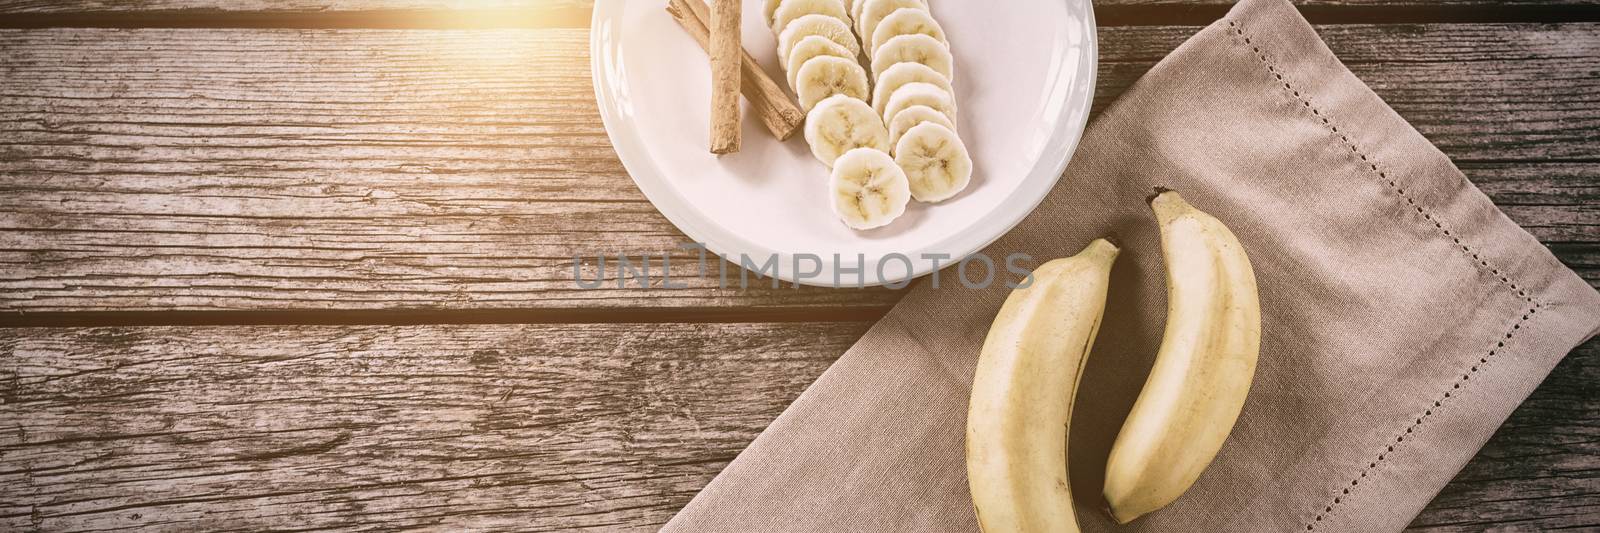 Overhead of banana and slices of banana with cinnamon stick in plate on wooden table